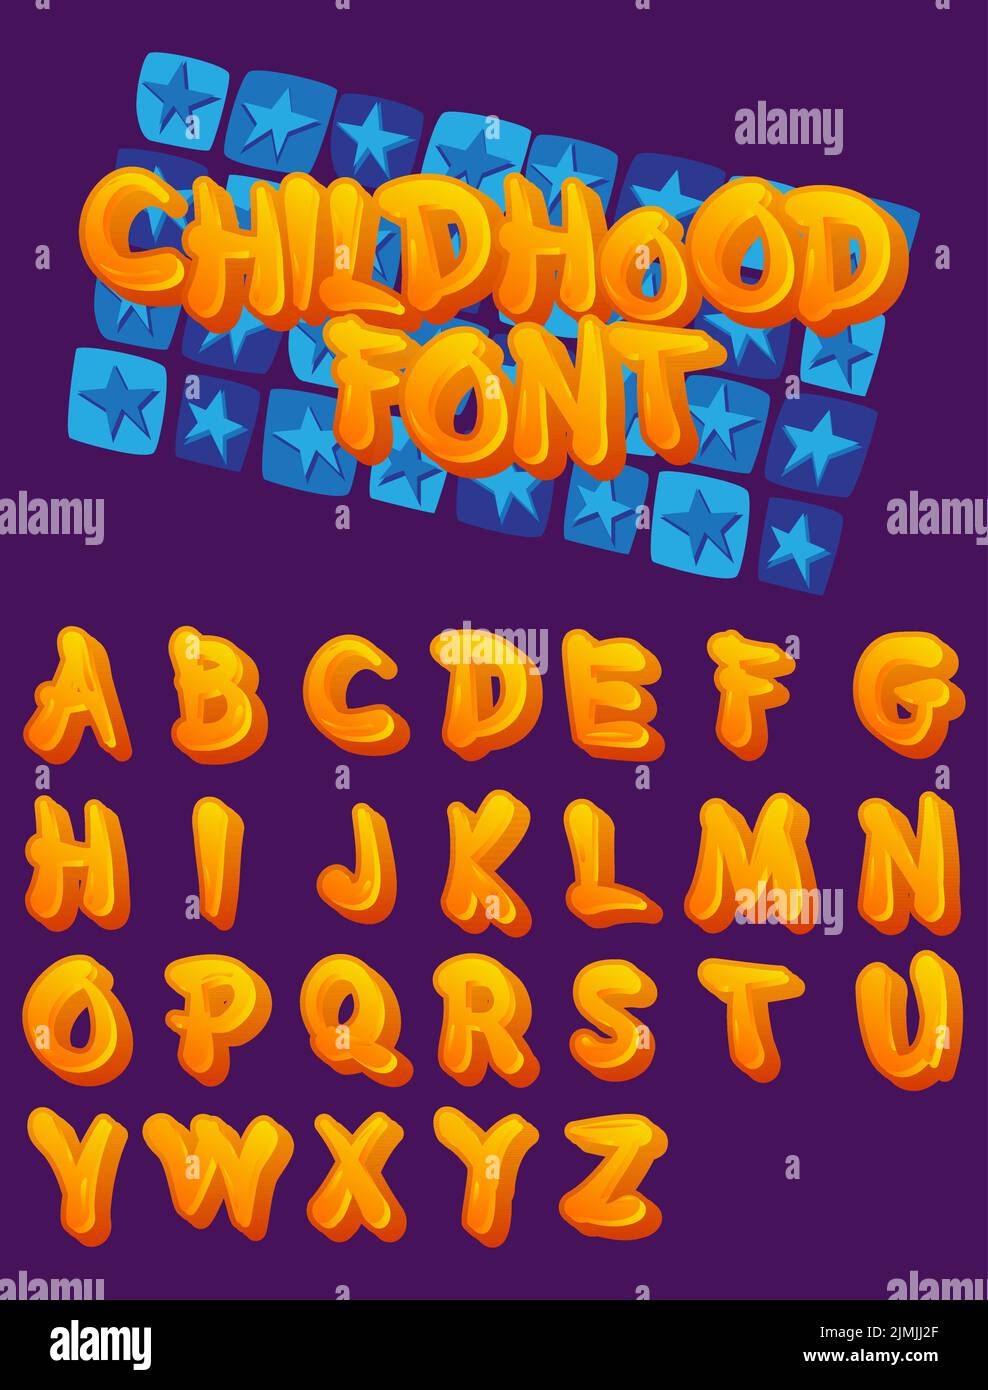 Childhood Font. Children's bright Alphabet Letters, Symbols. Colorful Vector Typescript for Marketing, Card and Poster Design. Stock Vector